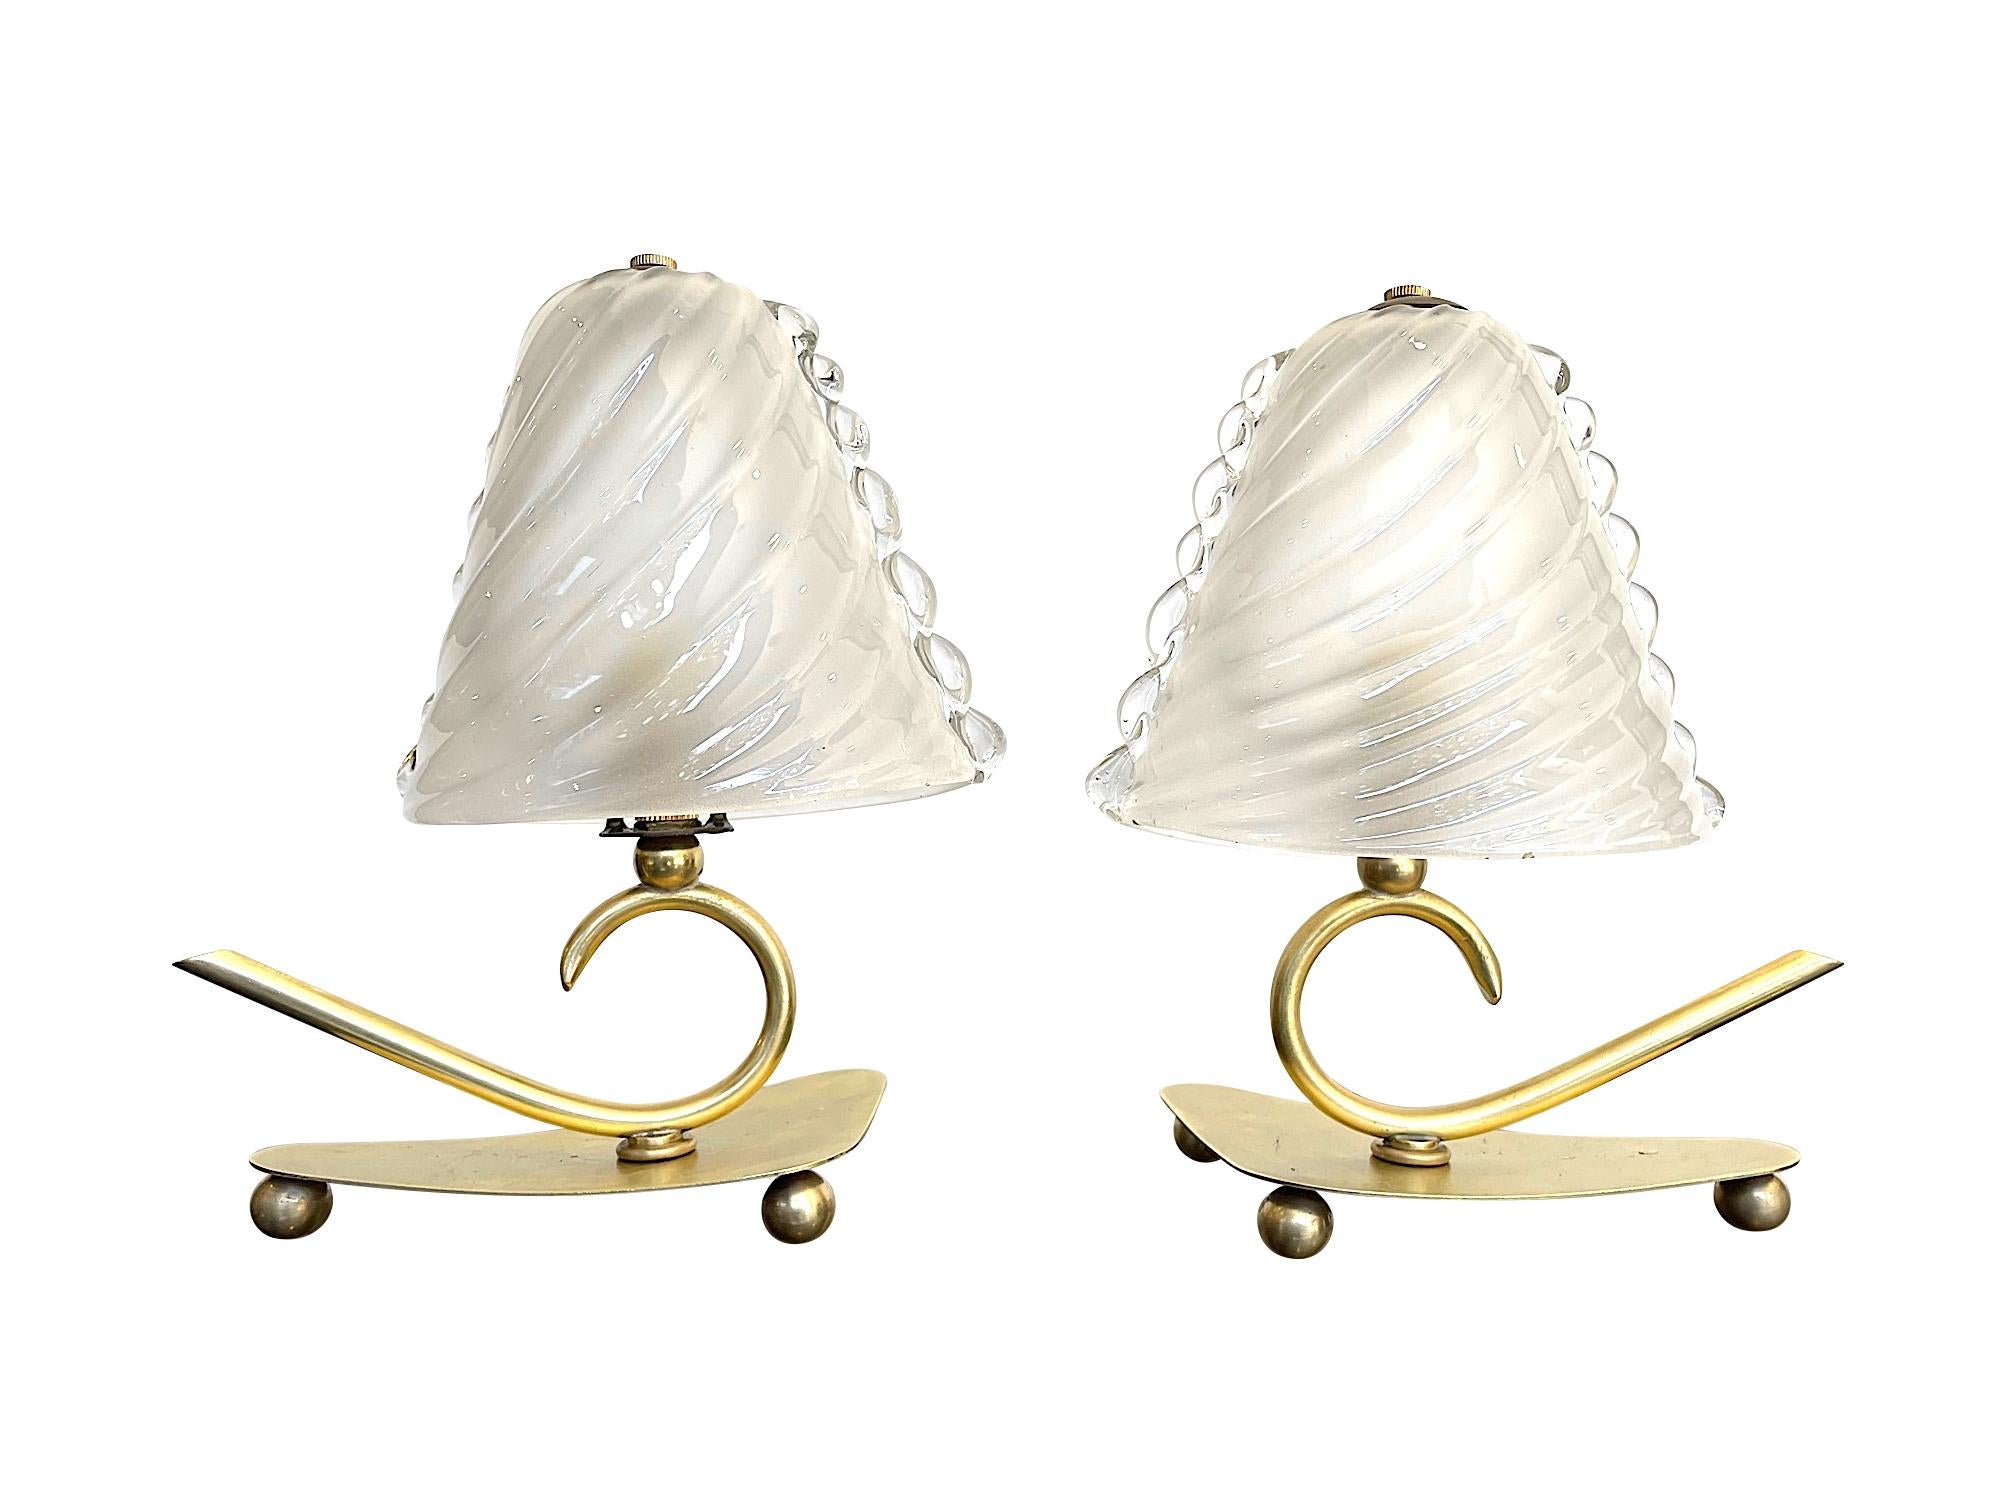 A lovely pair of Barovier 1960s Italian lamps with twisted Murano glass with shade scolloped edges. Mounted on A brass base with decorative curved stem on brass spherical feet. Re wired with new brass fittings and antique cord flex and PAT tested.